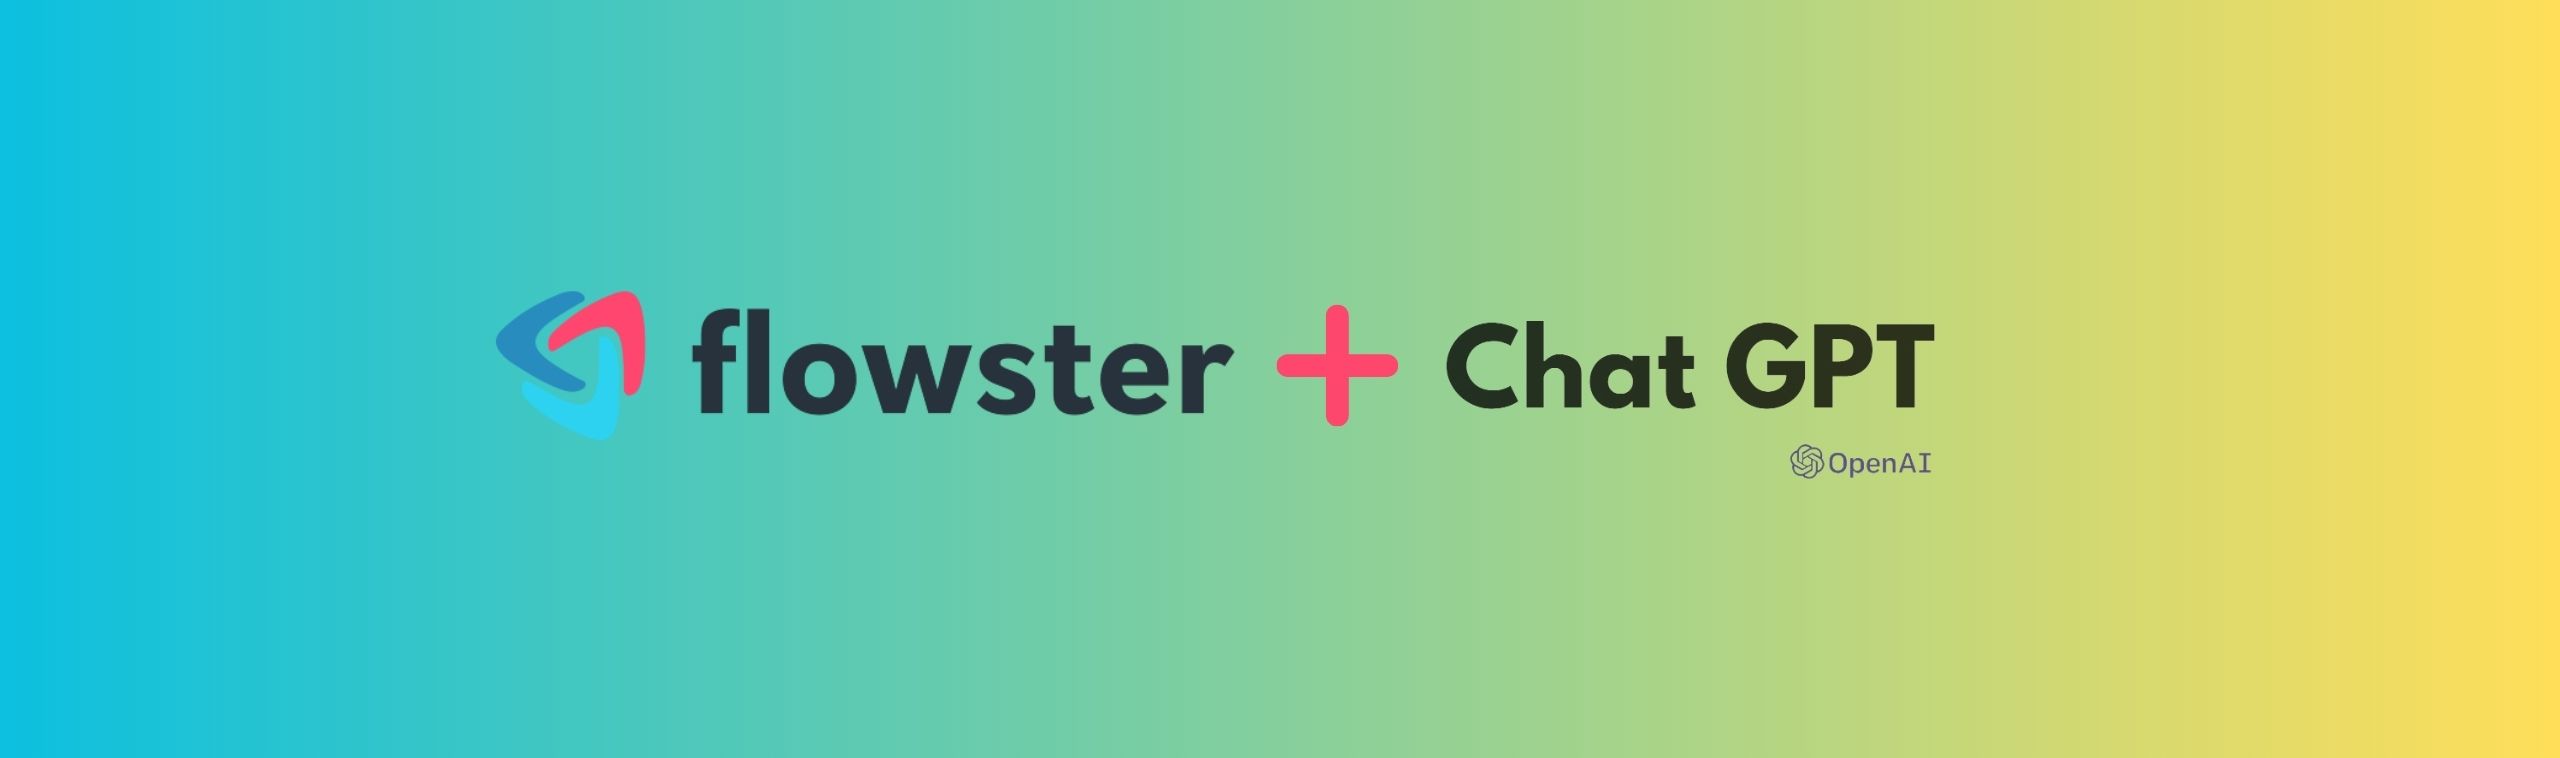 Introducing Flowster's ChatGPT Integration: Quickly Create Standard Operating Procedures (SOPs)